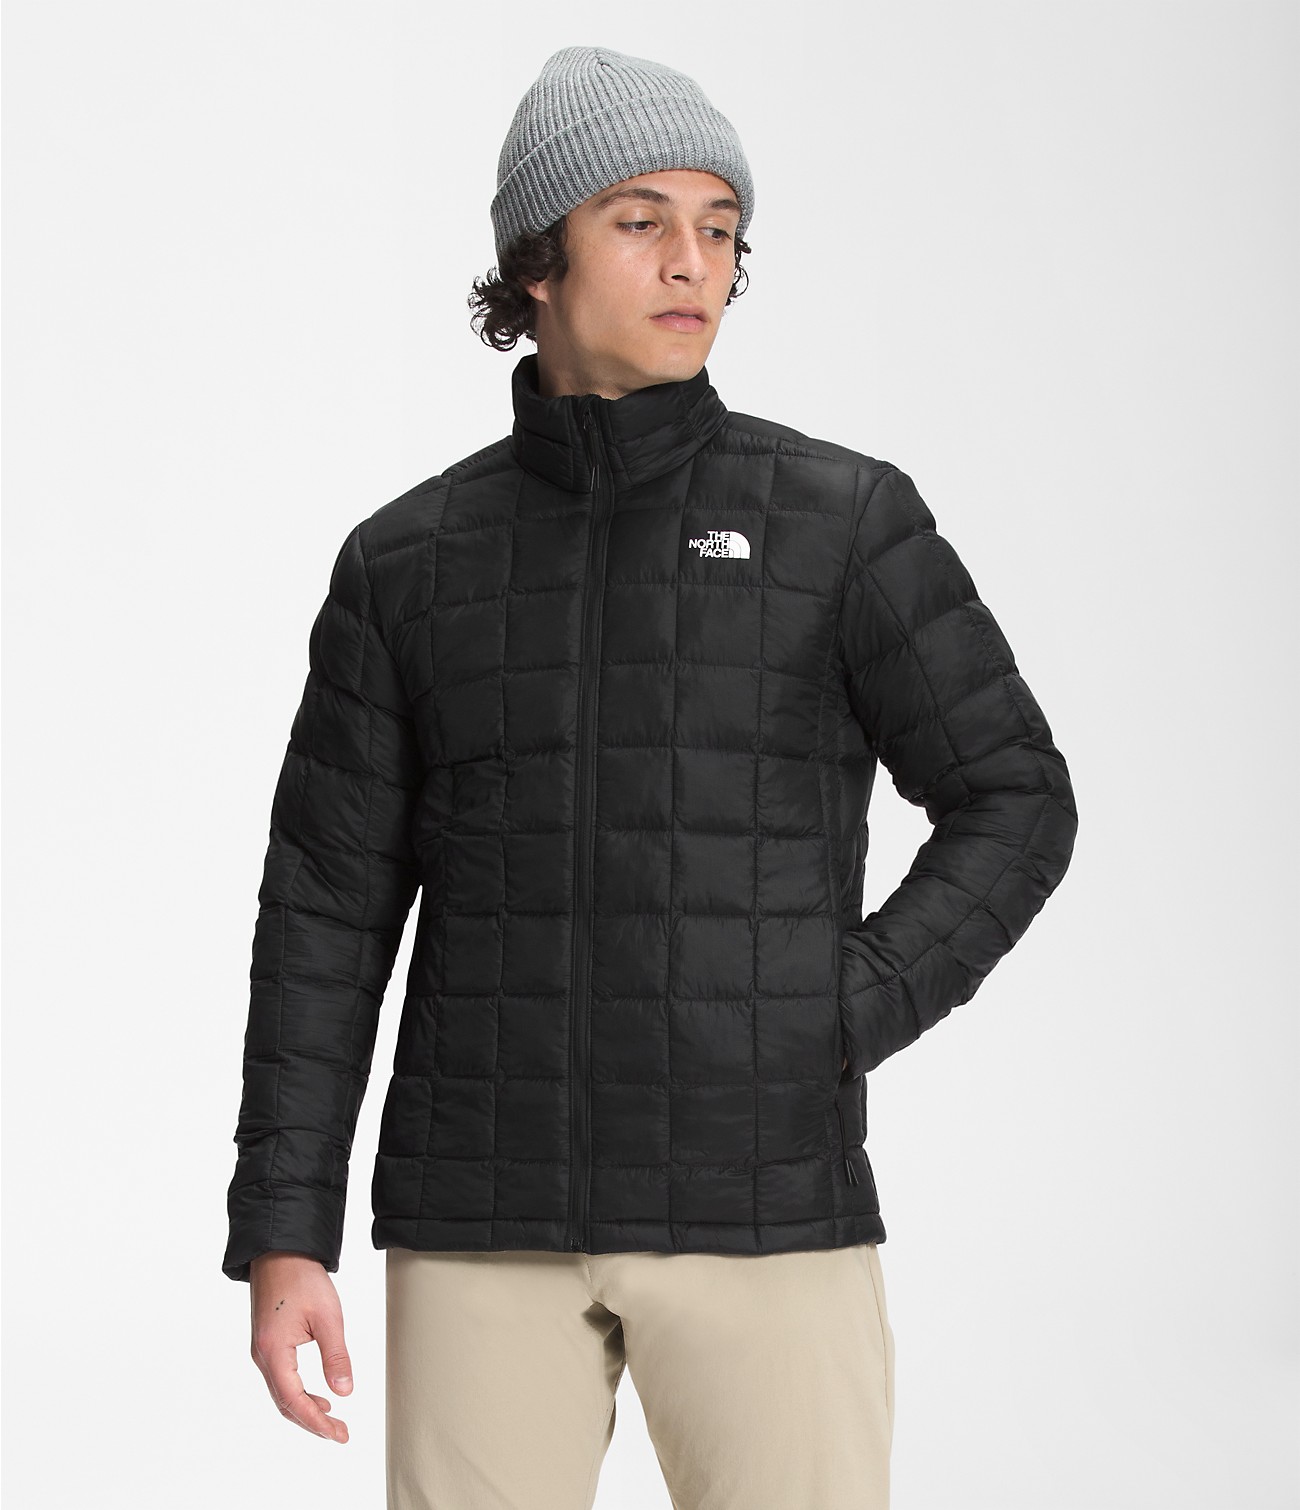 Unlock Wilderness' choice in the Marmot Vs North Face comparison, the ThermoBall™ Eco Jacket 2.0 by The North Face